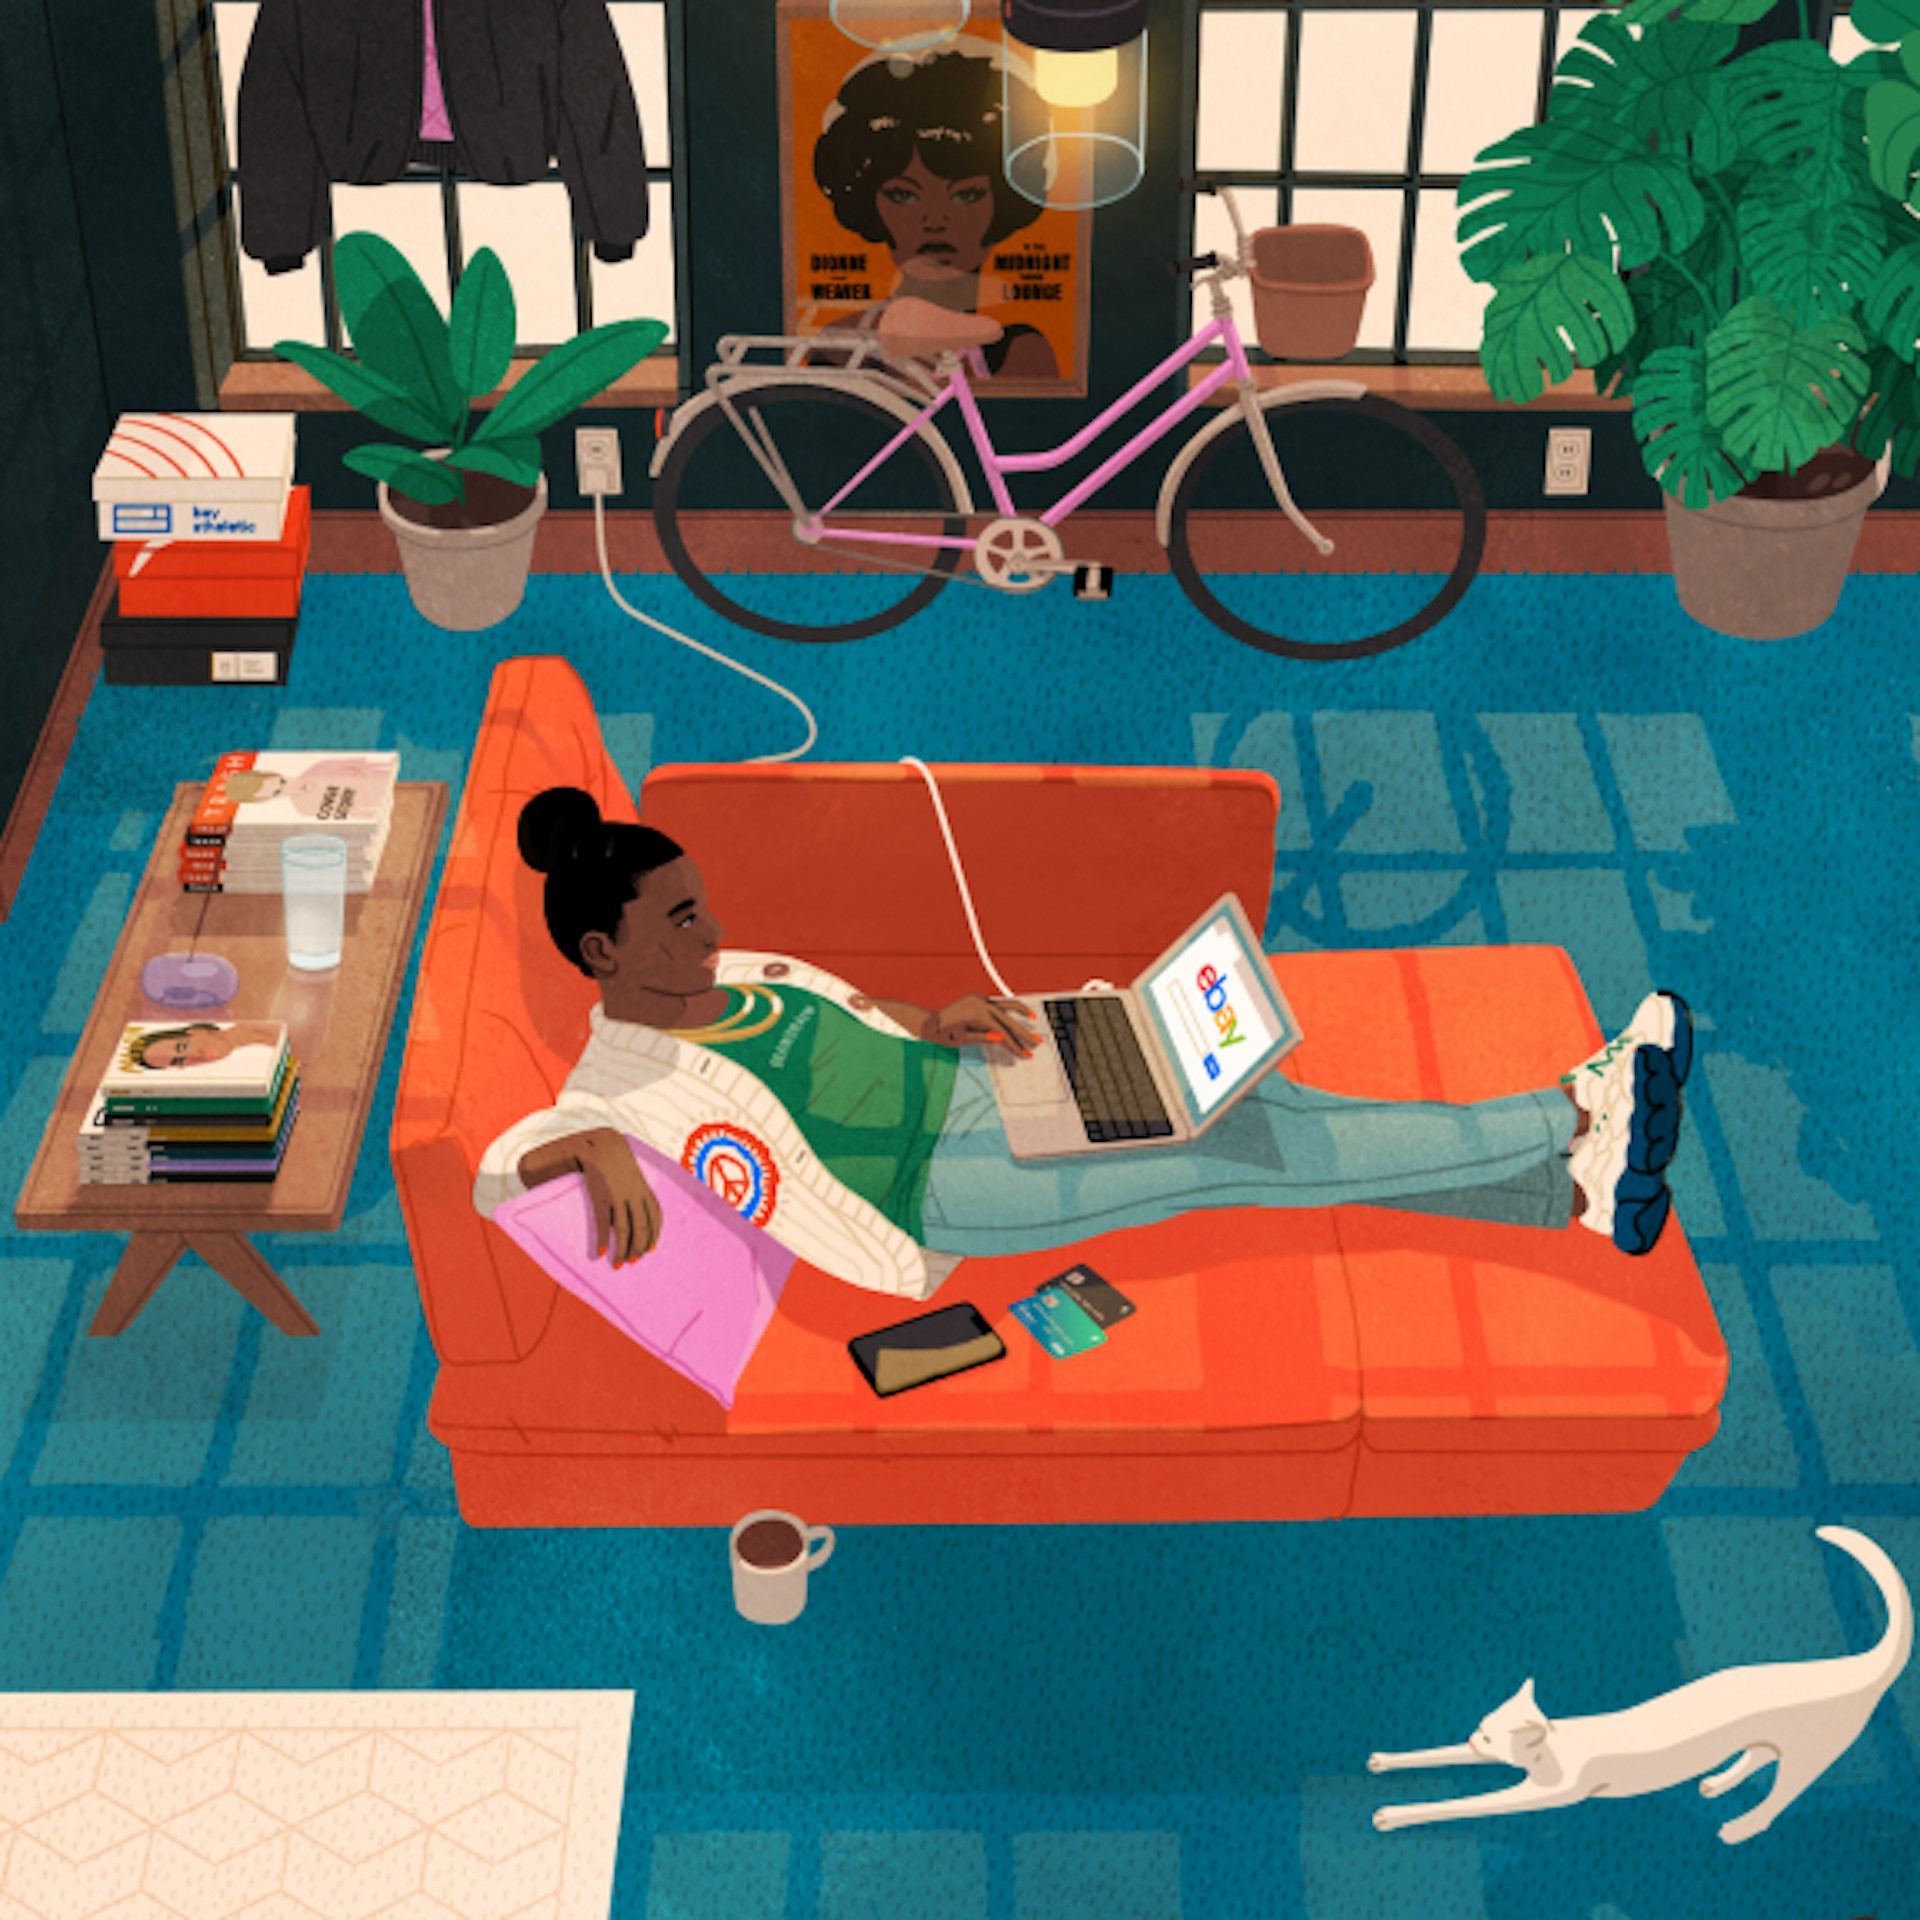 A person is lying on an orange sofa, using a laptop displaying the eBay website. The room includes a bicycle, plants, a white cat stretching on the floor, and a coffee table with books and a drink. There are shoe boxes in the corner and a poster on the wall in the background.